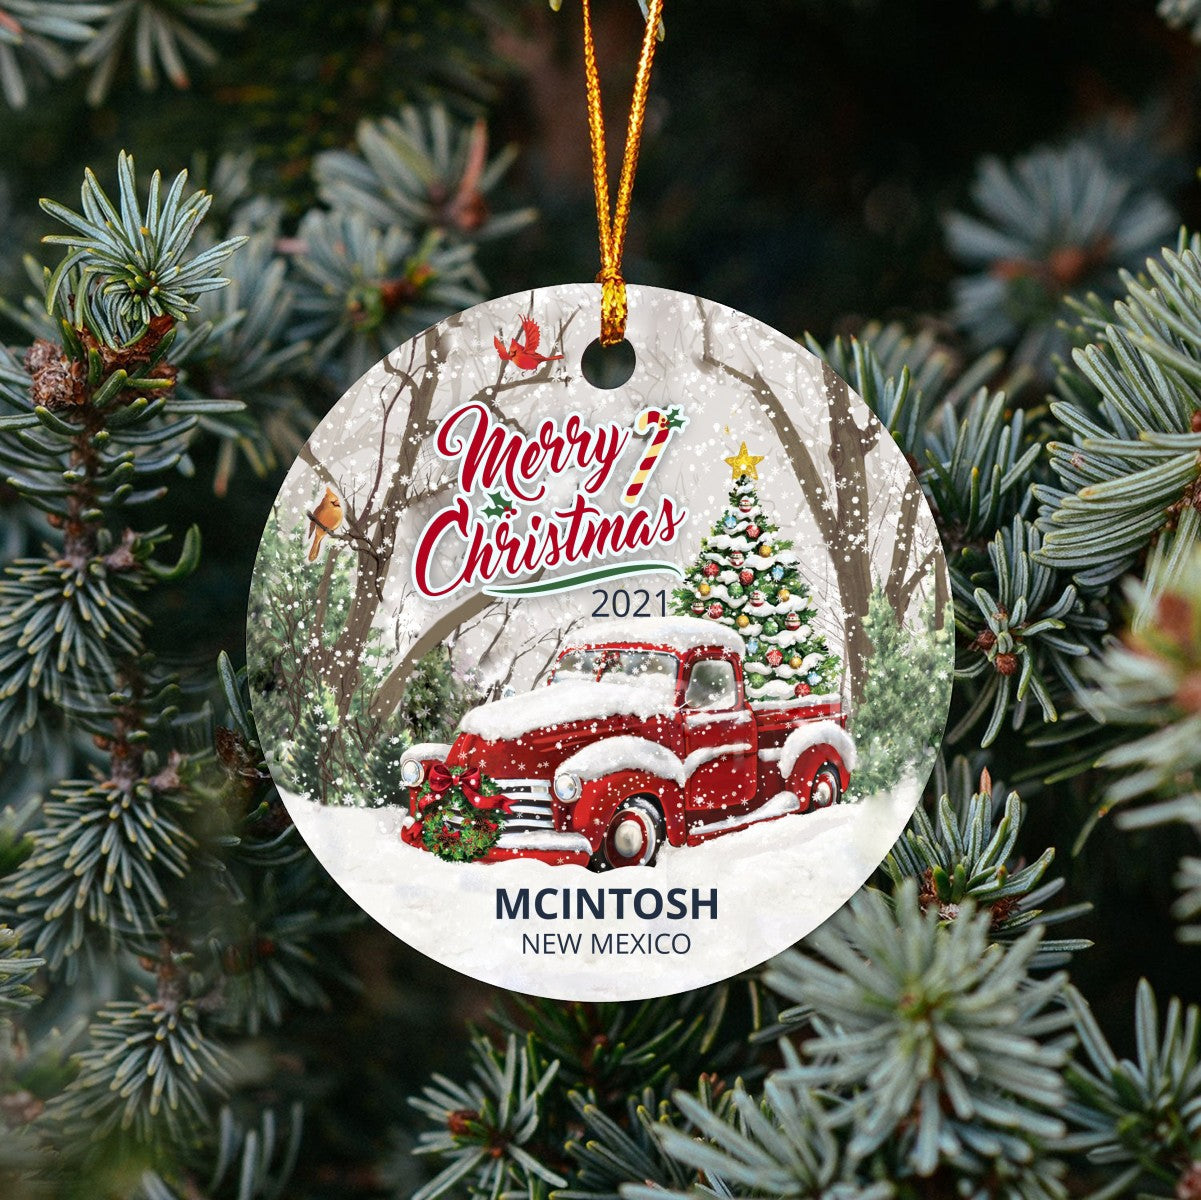 Christmas Tree Ornaments Mcintosh - Ornament With Name City, State Mcintosh New Mexico NM Ornament - Red Truck Xmas Ornaments 3'' Plastic Gift For Family, Friend And Housewarming